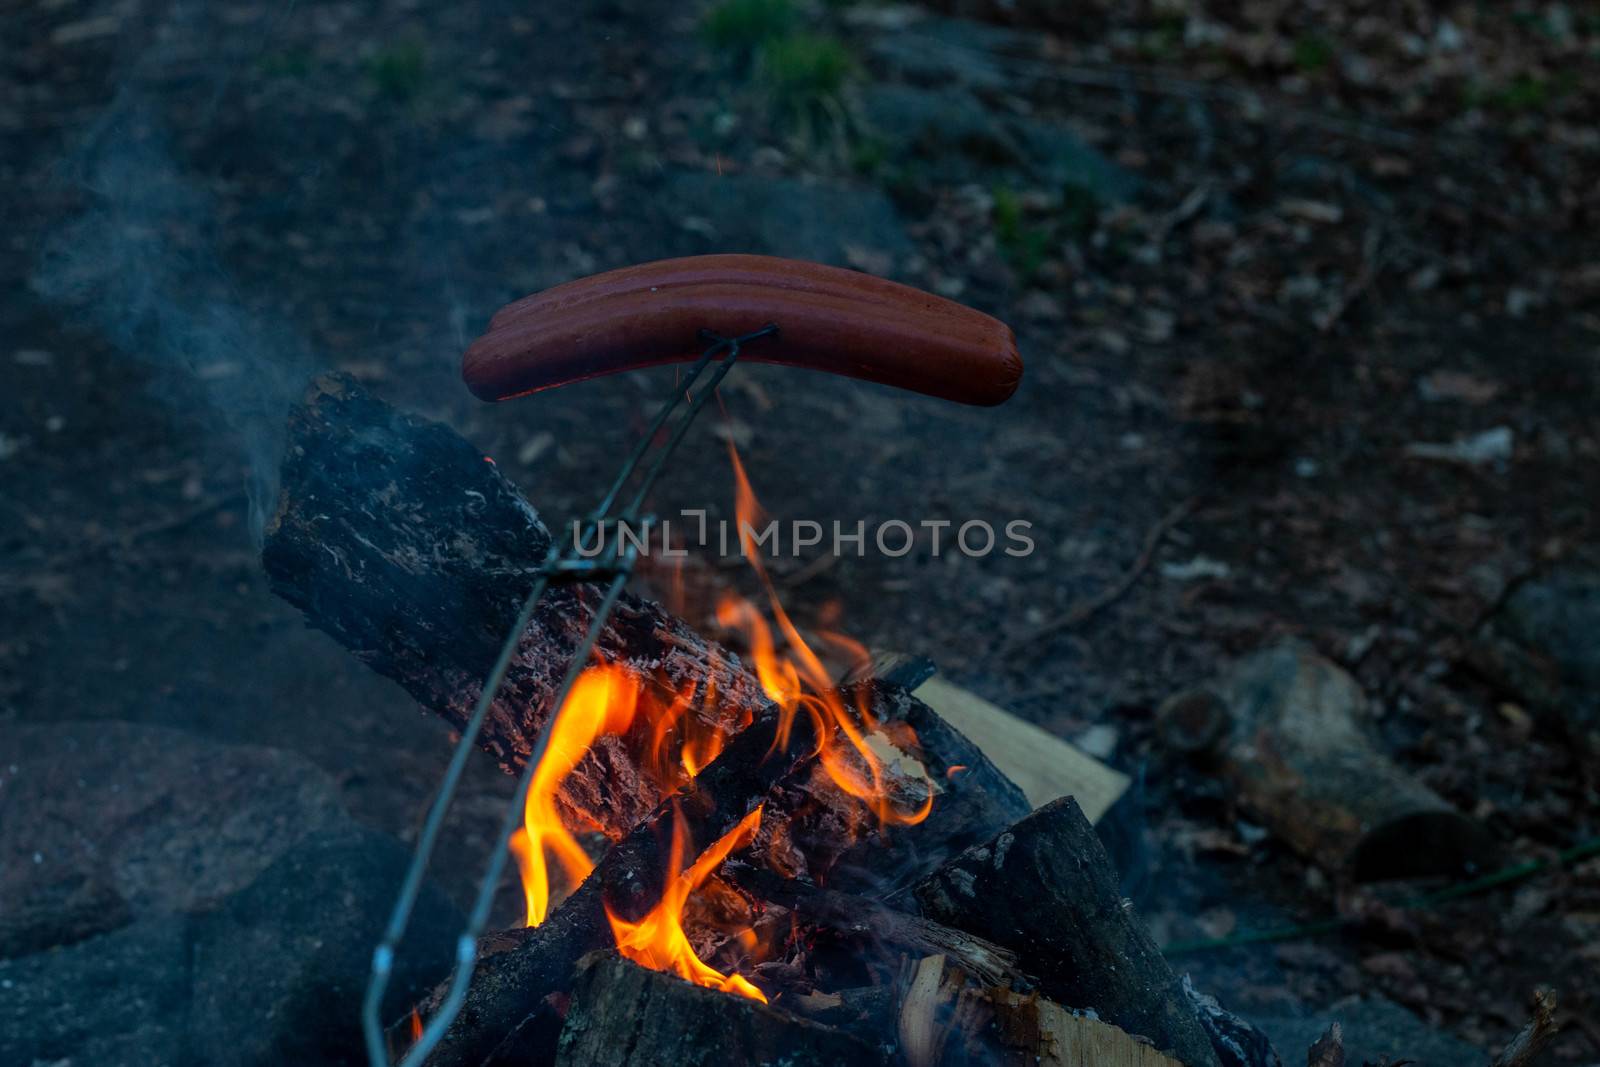 Making and cooking Hot dog sausages over open camp fire. Grilling food over flames of bonfire on wooden branch - stick spears in nature at night. Scouts way of preparing food. by mynewturtle1